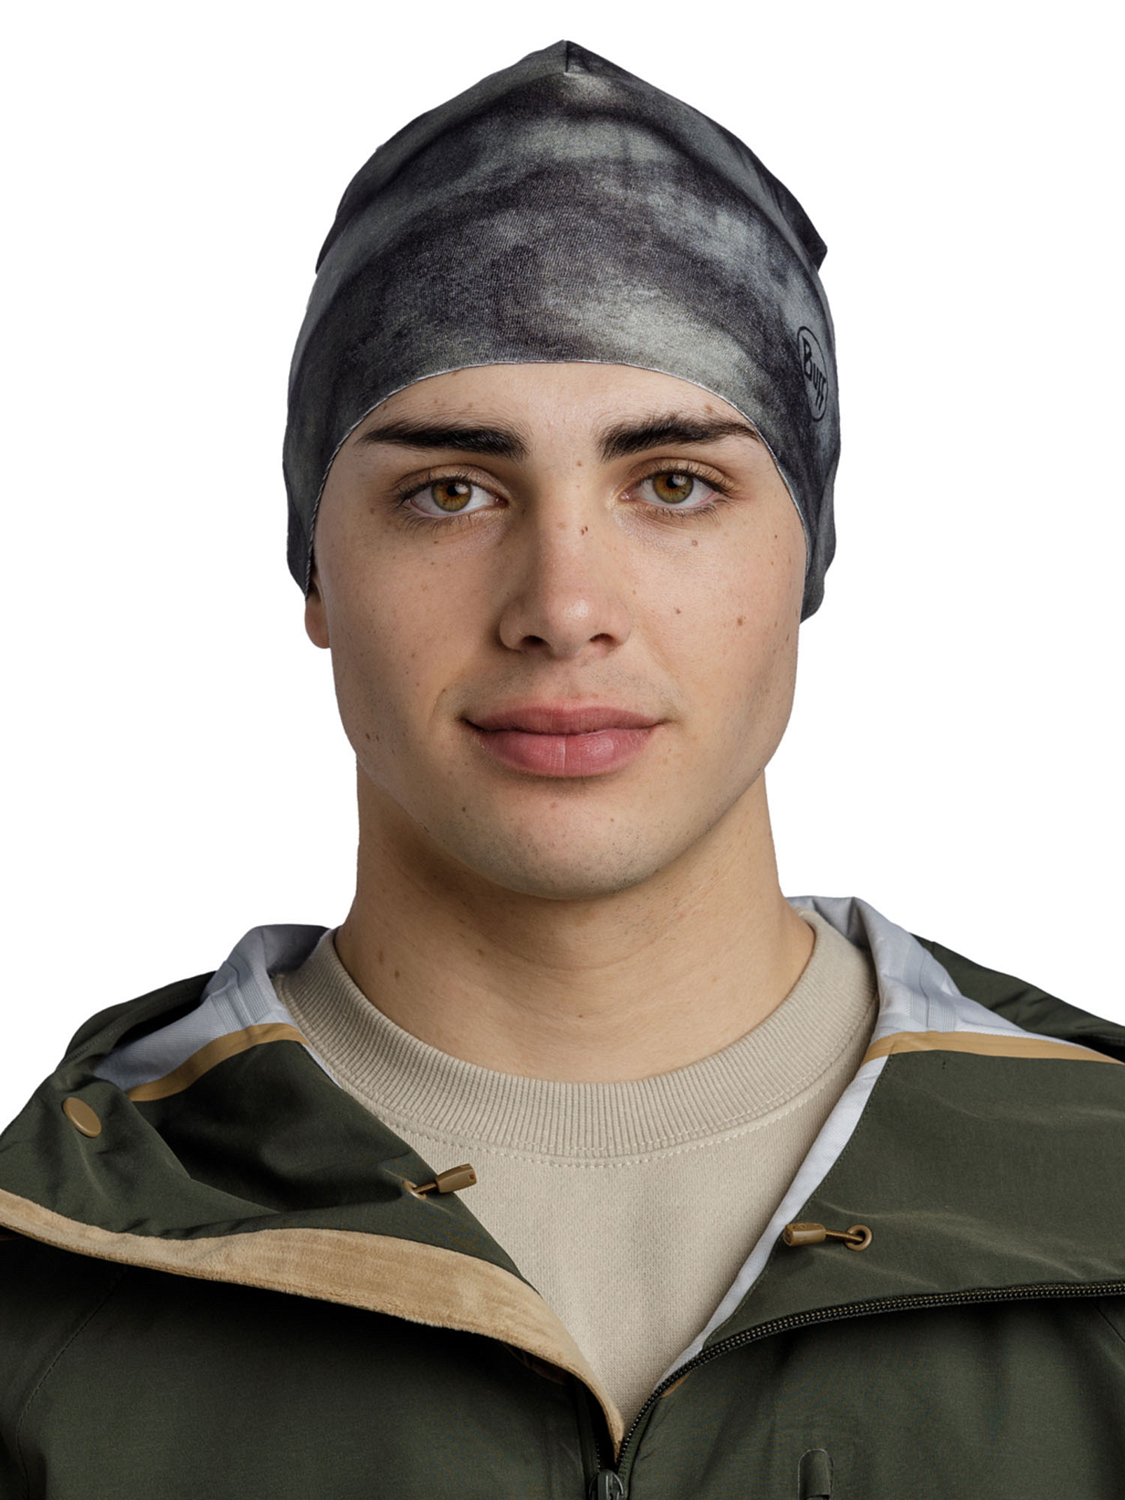 Шапка Buff Thermonet Hat Fust Camouflage